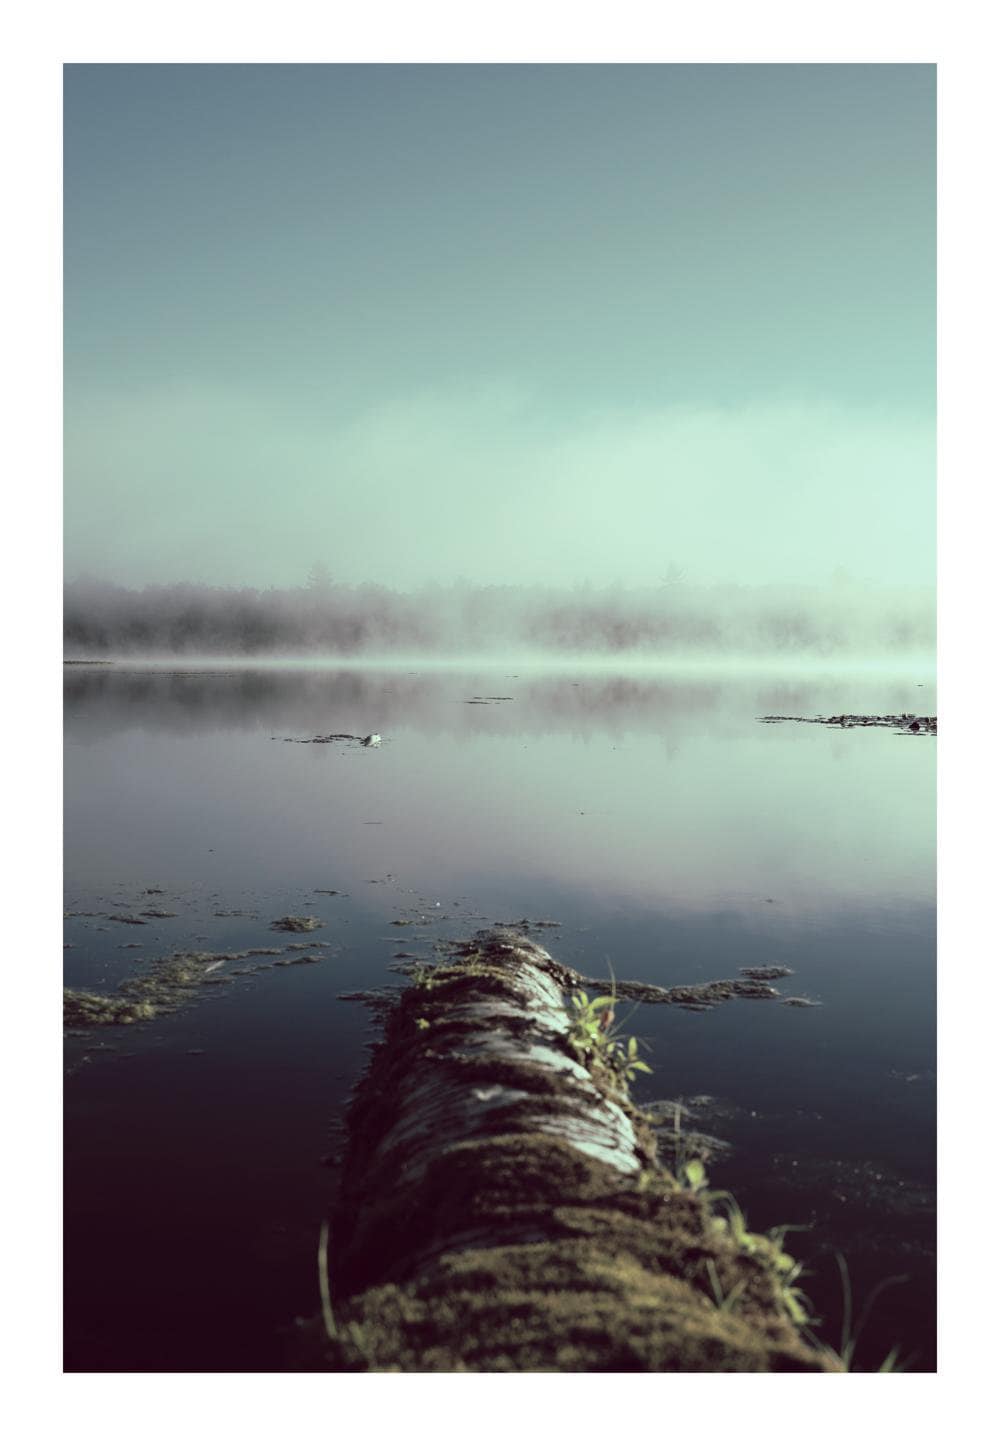 Photograph of fog over a lake, edited, increased color and contrast.